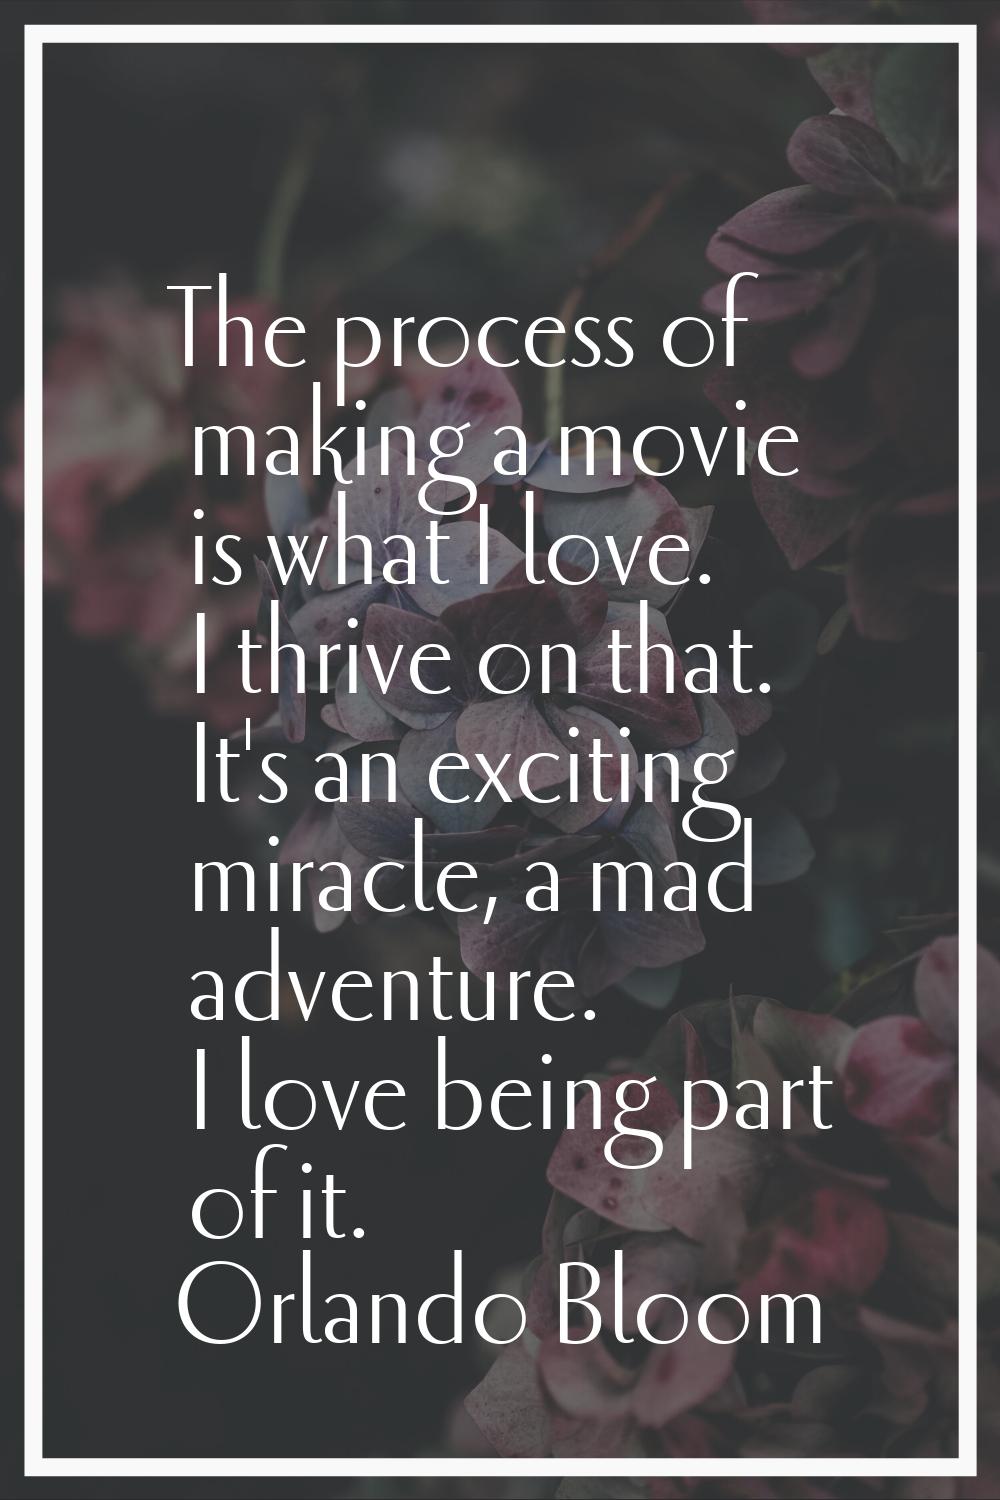 The process of making a movie is what I love. I thrive on that. It's an exciting miracle, a mad adv